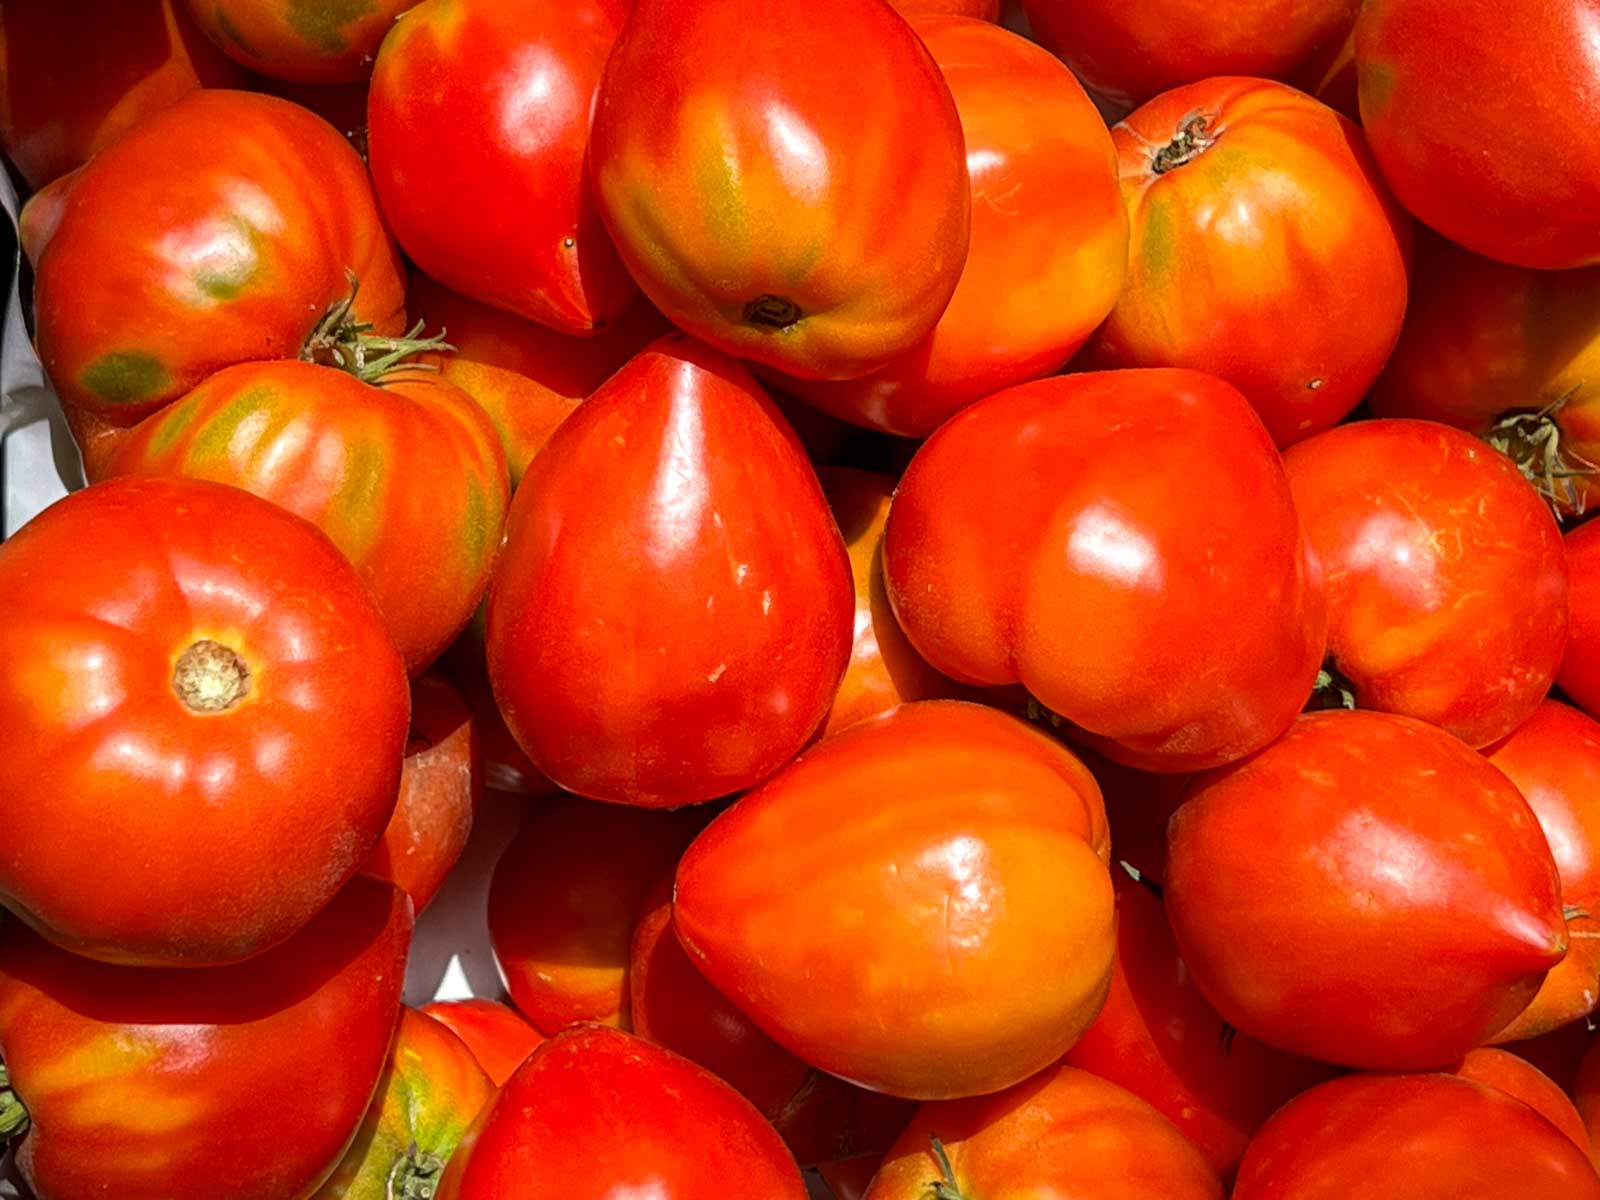 Tomatoes at the Farmers Market